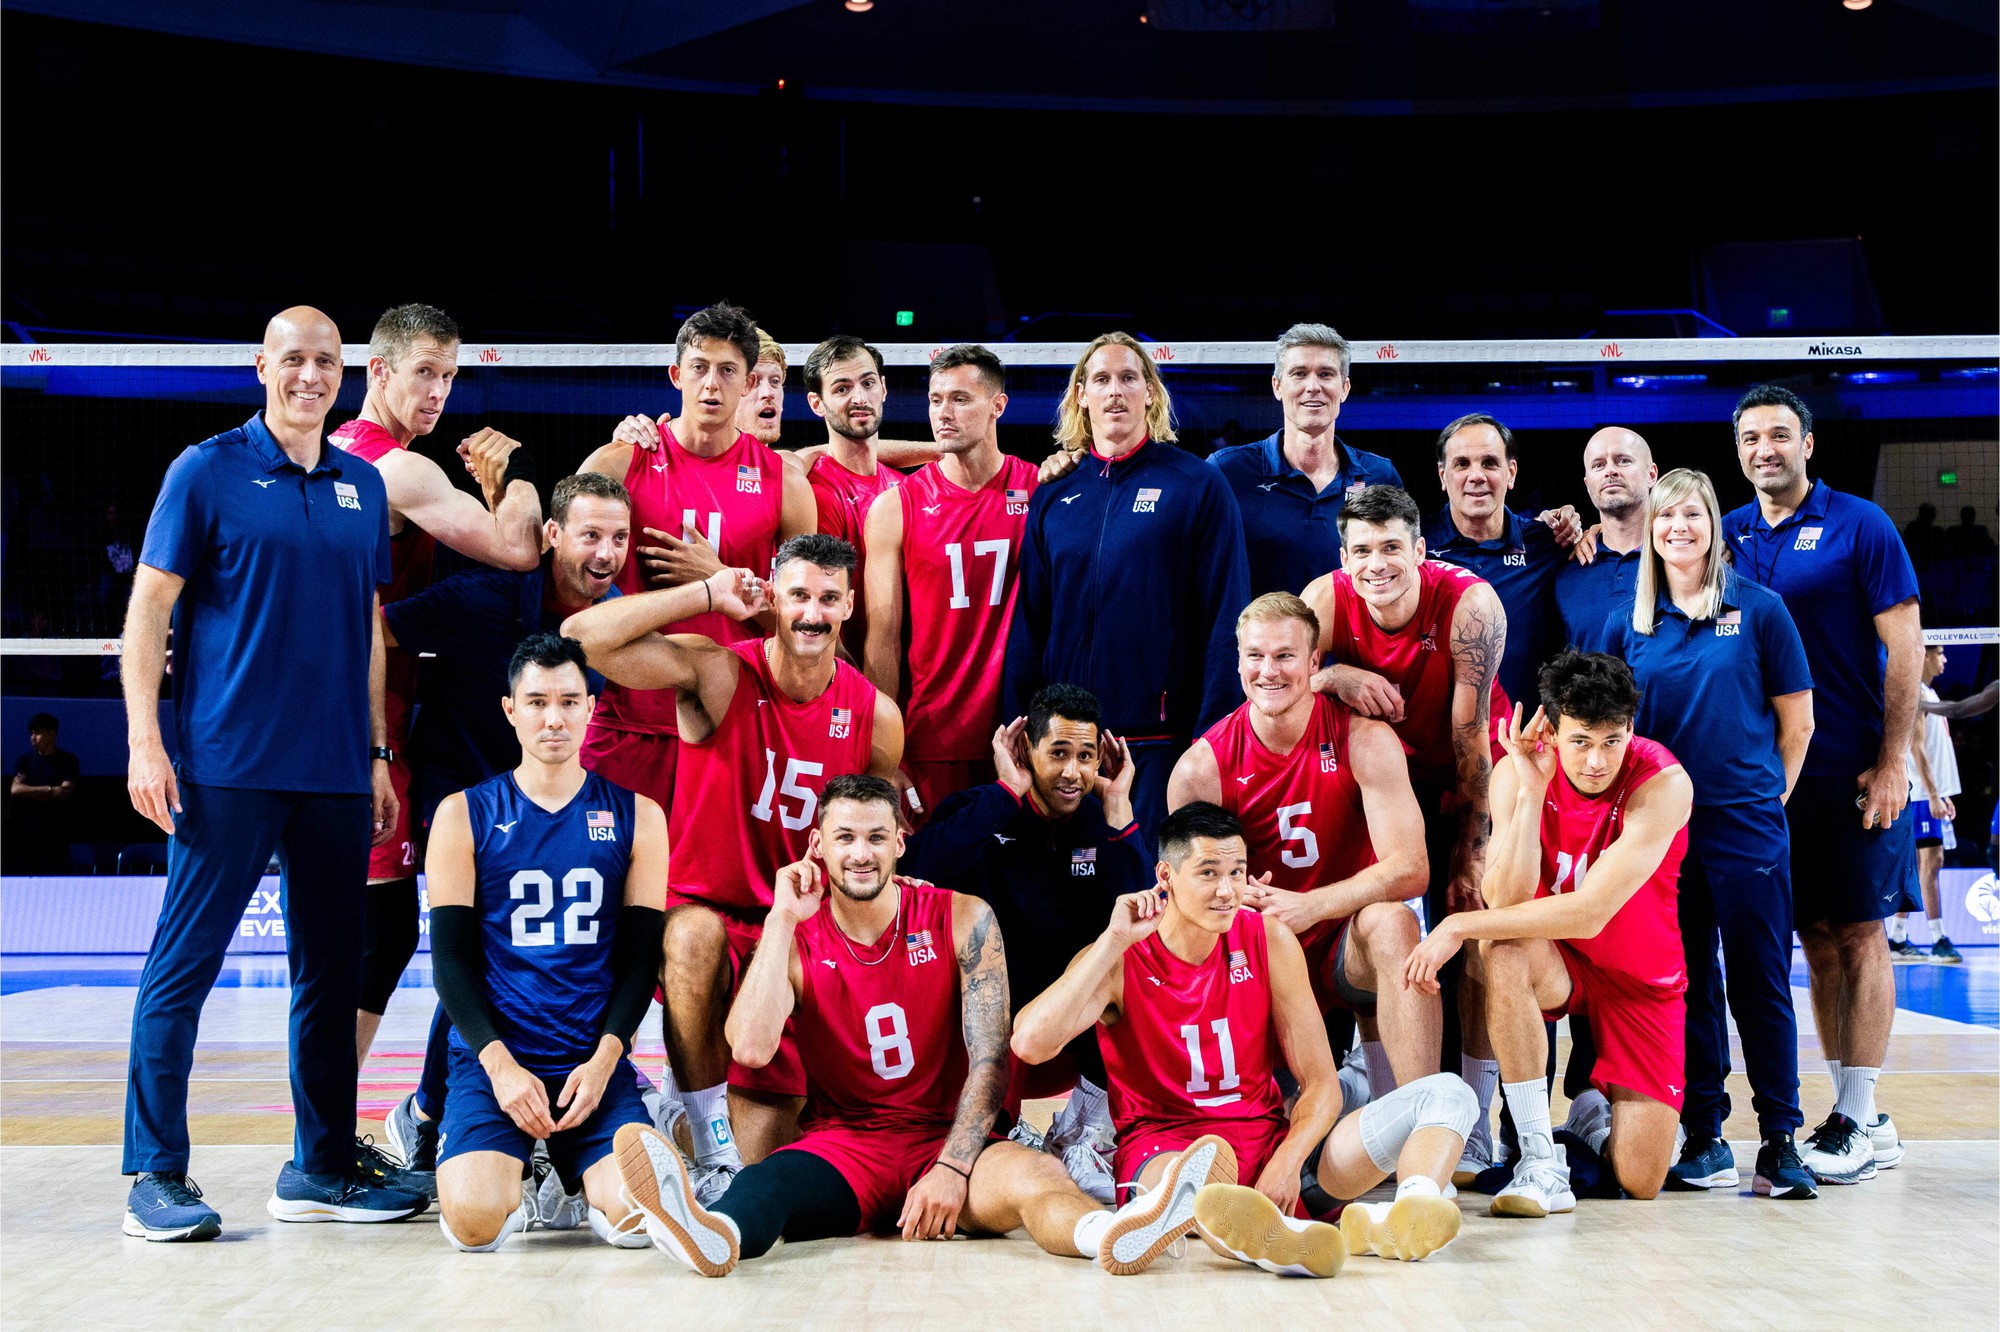 Speraw leads Team USA to quarter finals in FIVB Volleyball Nations